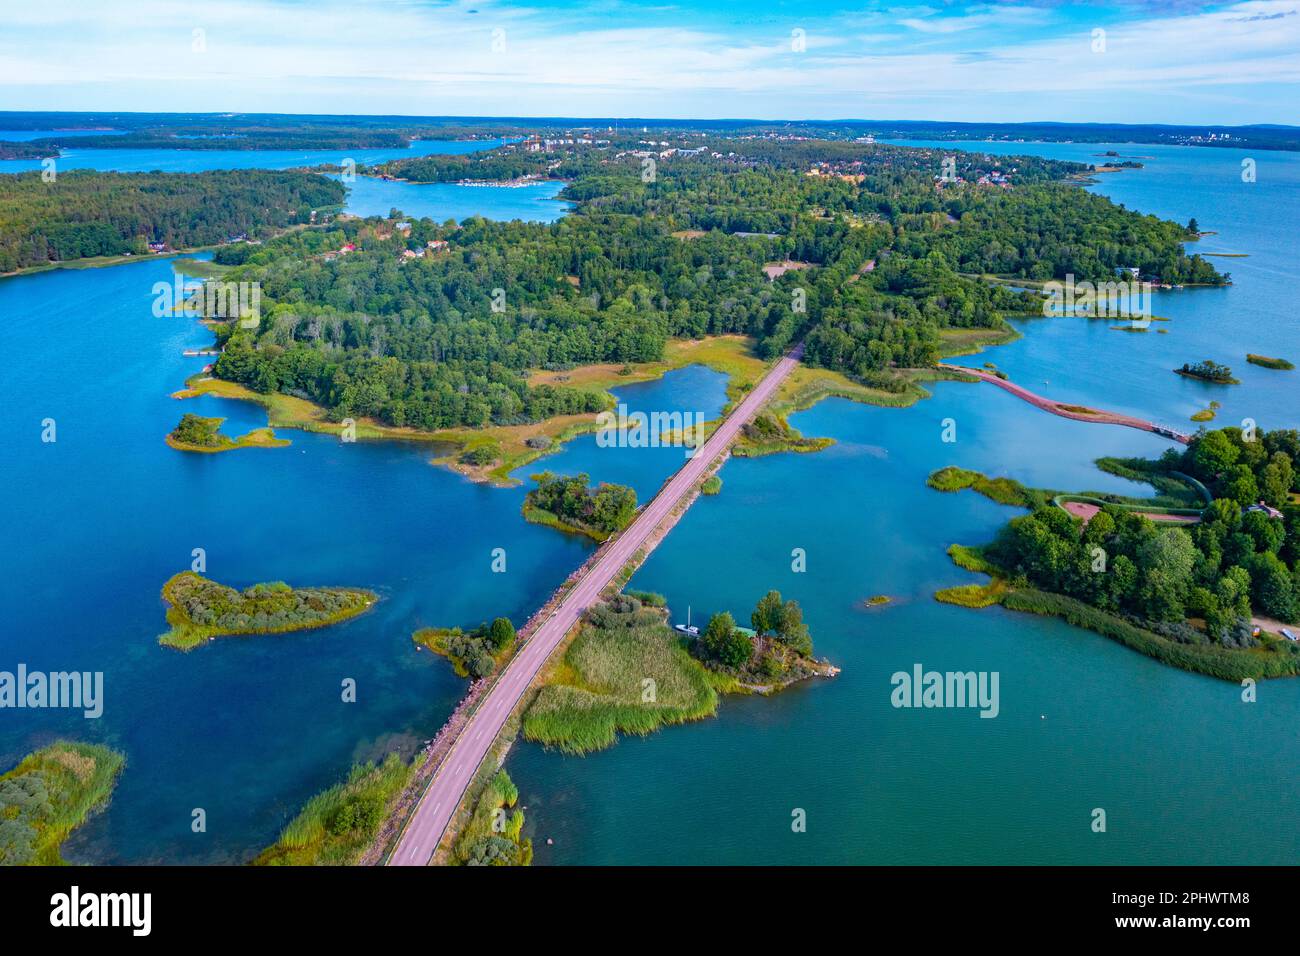 Road connecting remote islands at Aland archipelago in Finland. Stock Photo